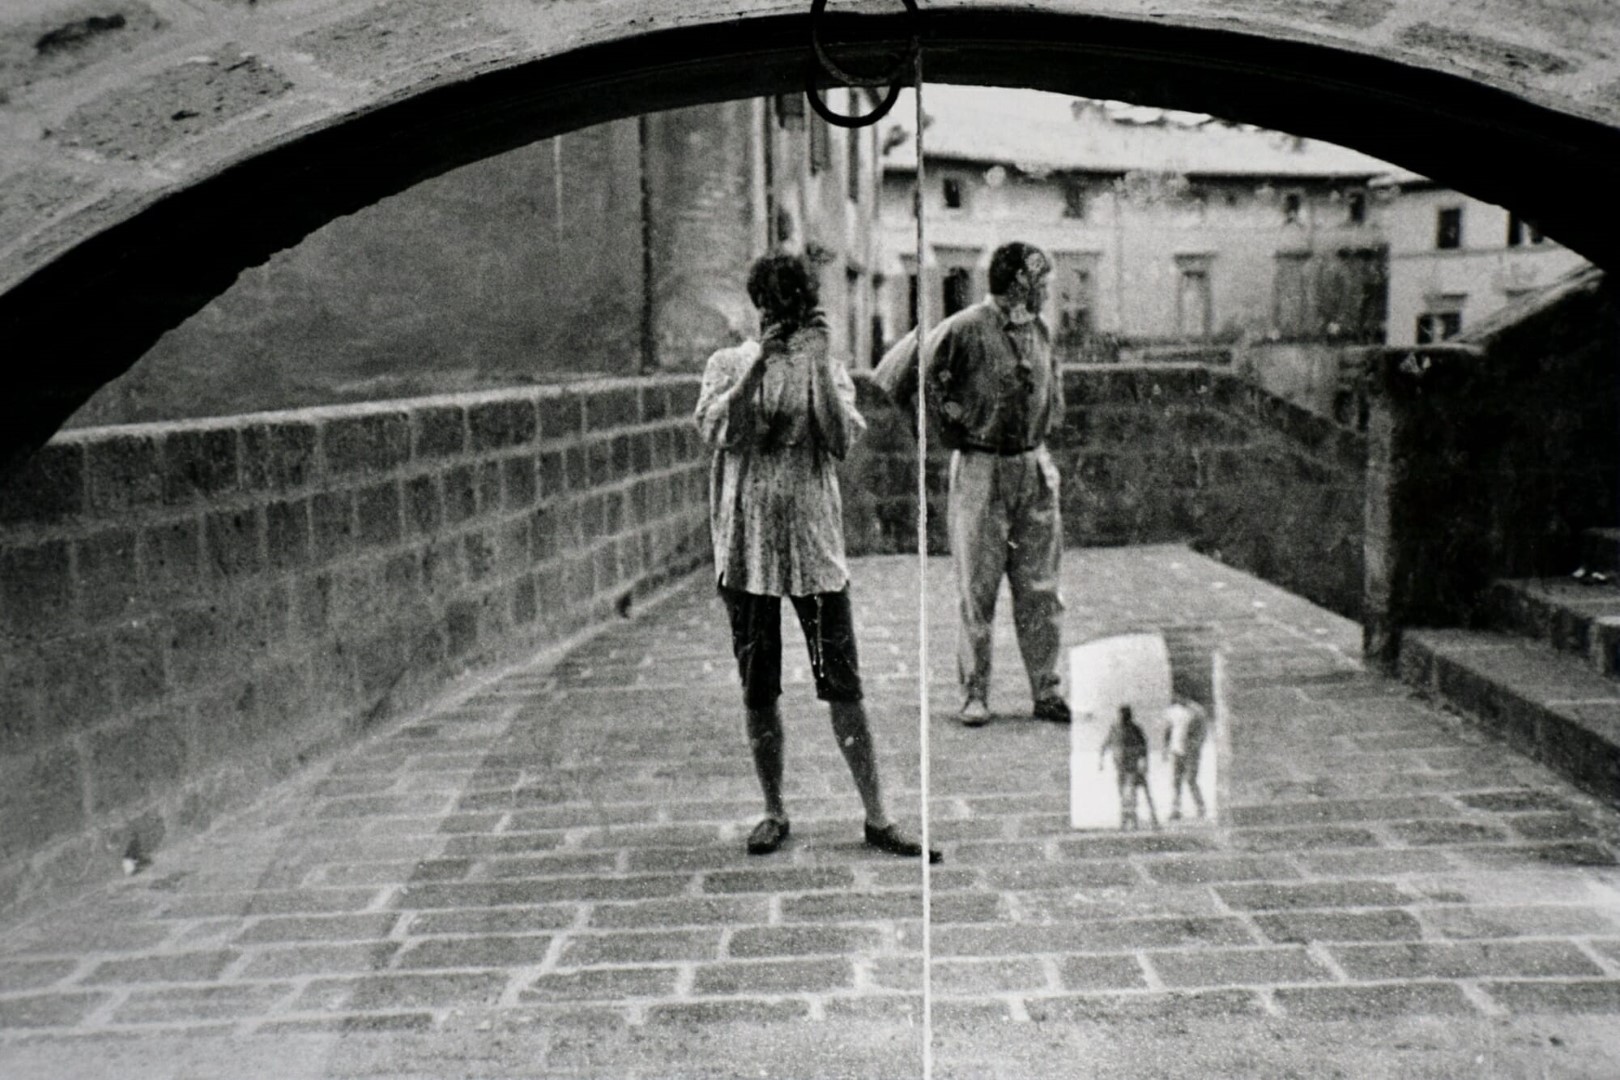 <span style="font-weight:normal;">Self portrait with André and little men in Orvieto, Italy, 1990</span>